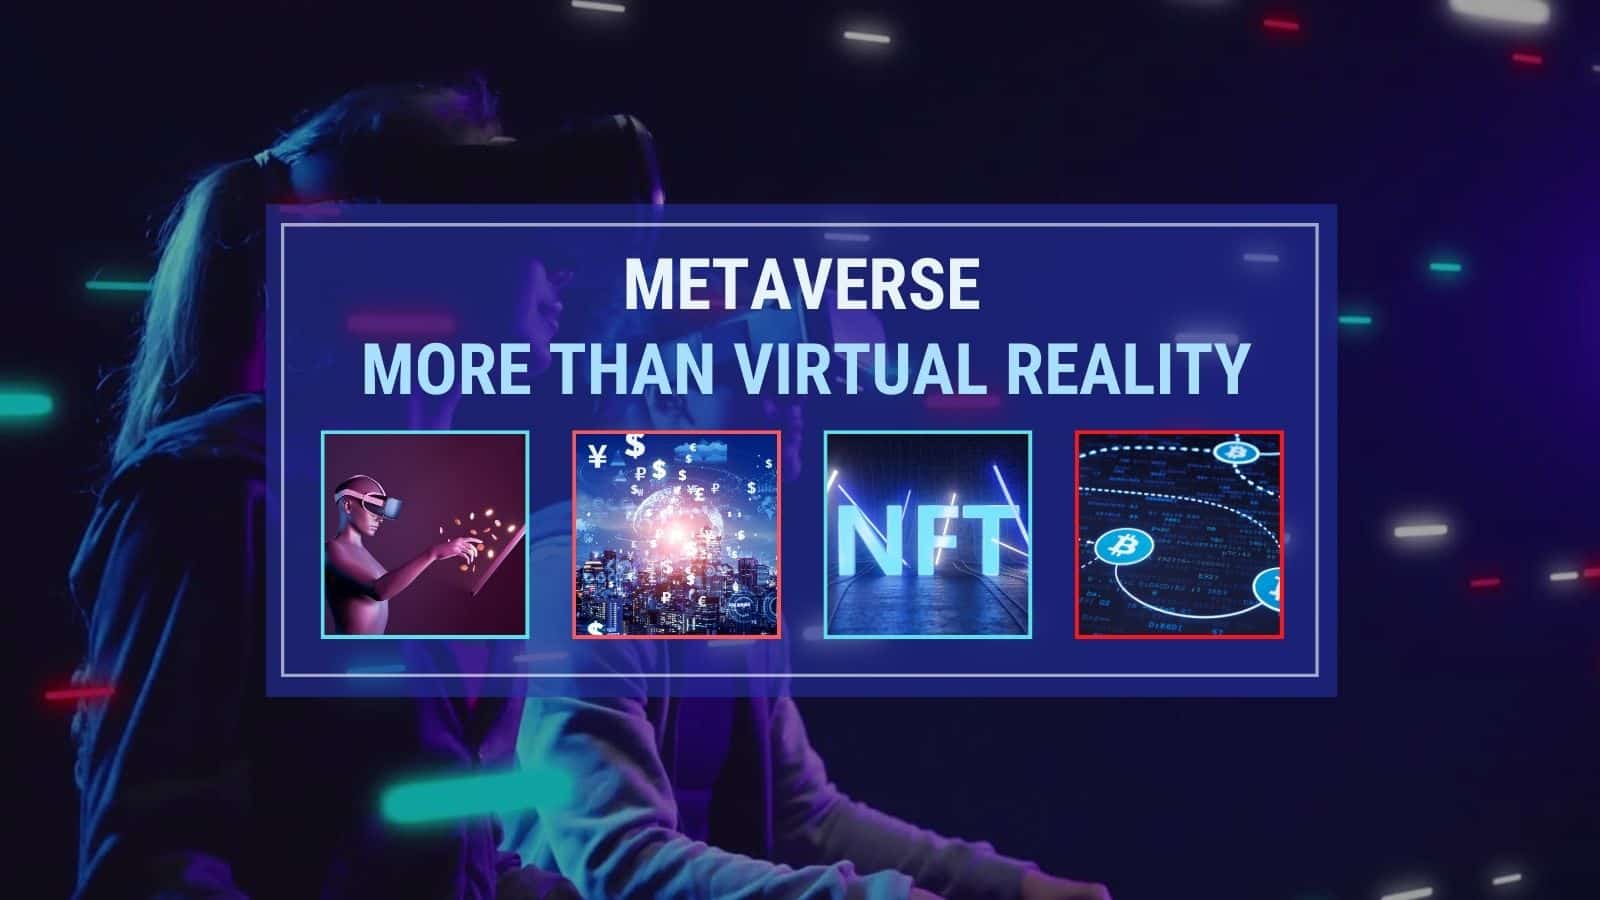 how big would the metaverse be